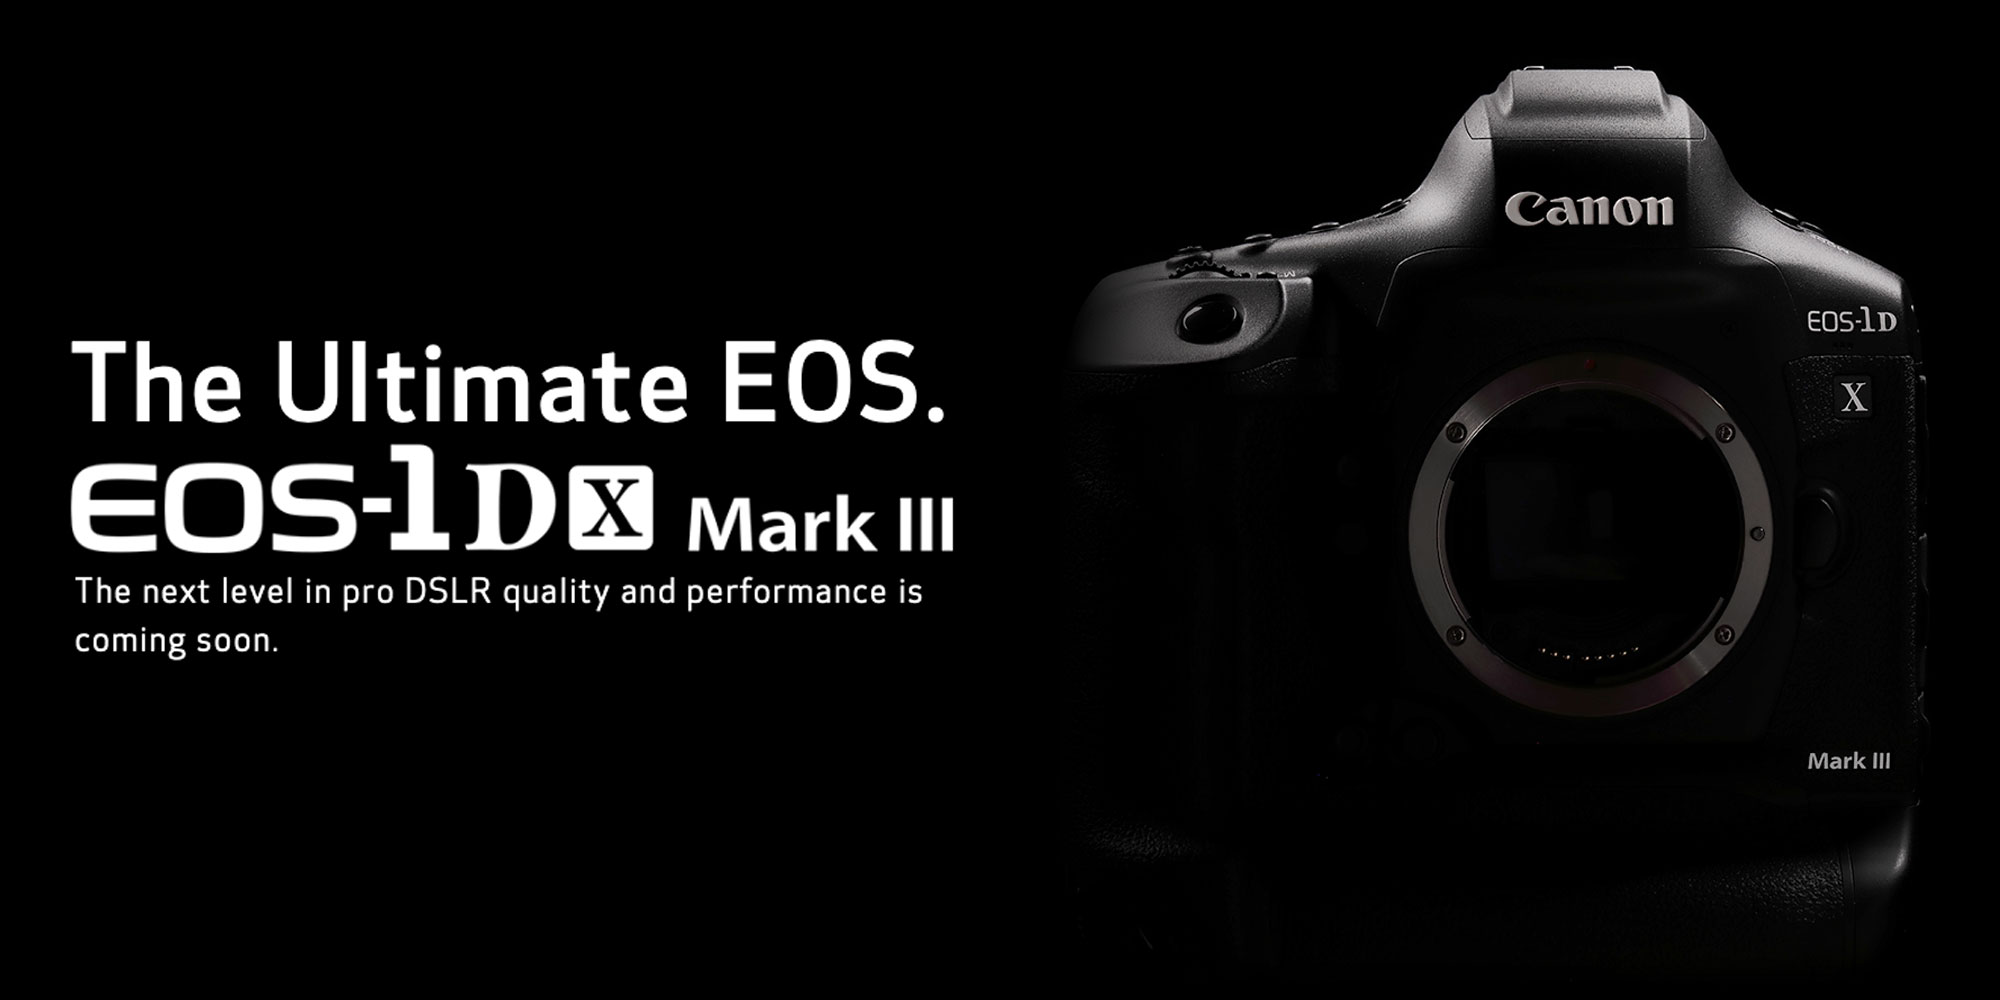 Canon S 1d X Mark Iii Is Here With Impressive Specs 9to5toys